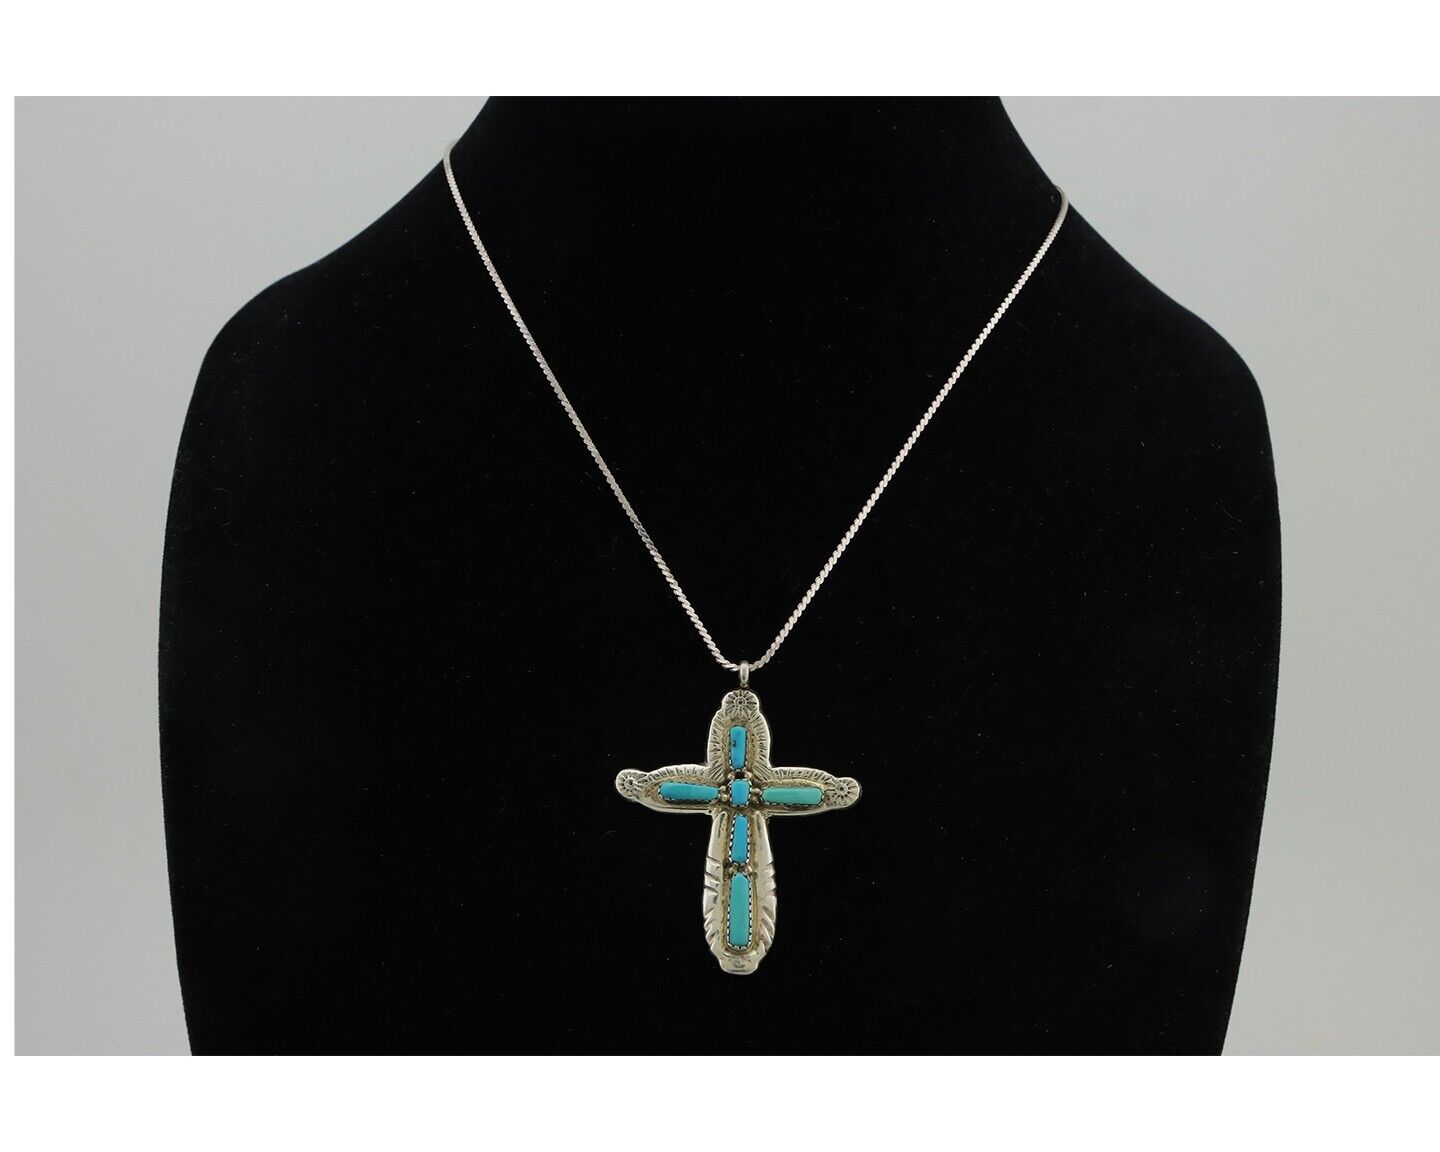 Zuni Cross Necklace 925 Silver Blue Turquoise Signed G&L LEEKITY C.80's